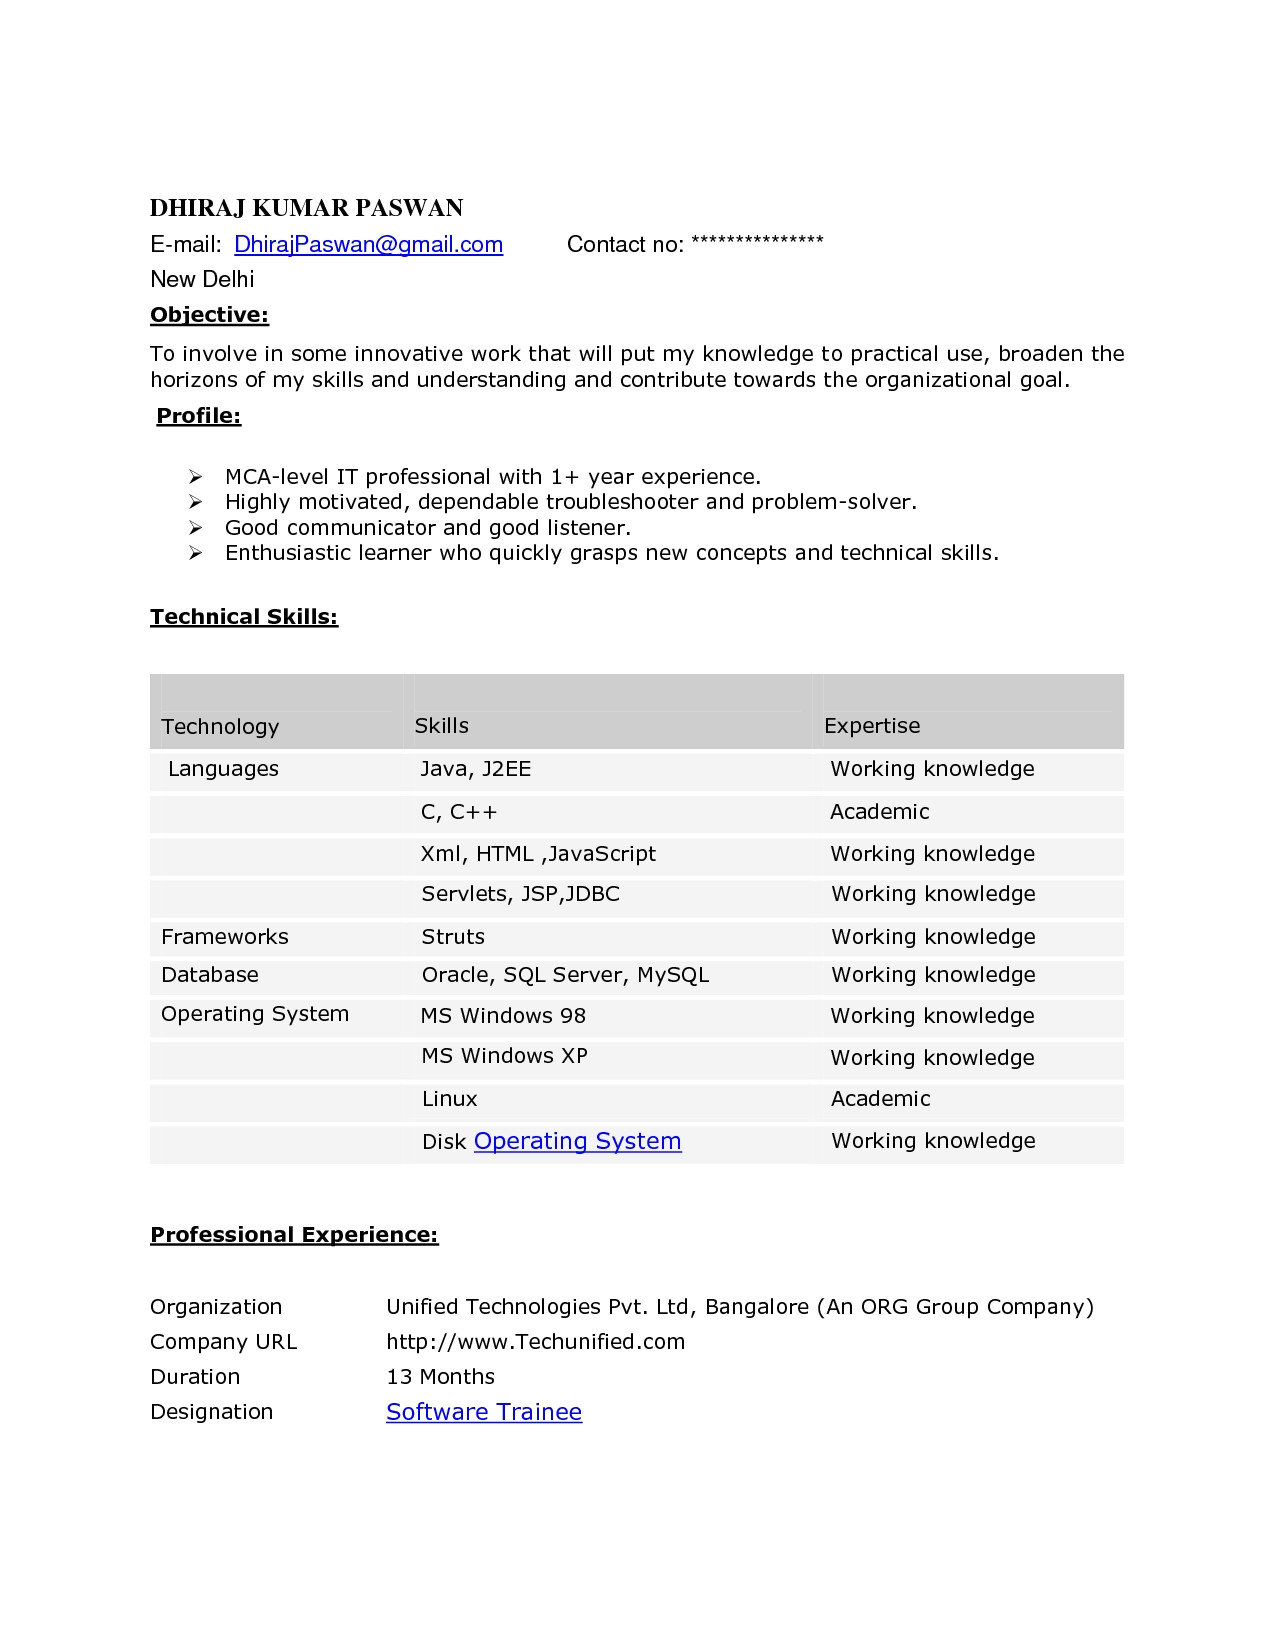 6 months experience resume sample in software engineer net 6 months experience resume sample in software engineer net resume samples for software engineers with experience inspirational 1 year experienced engineer